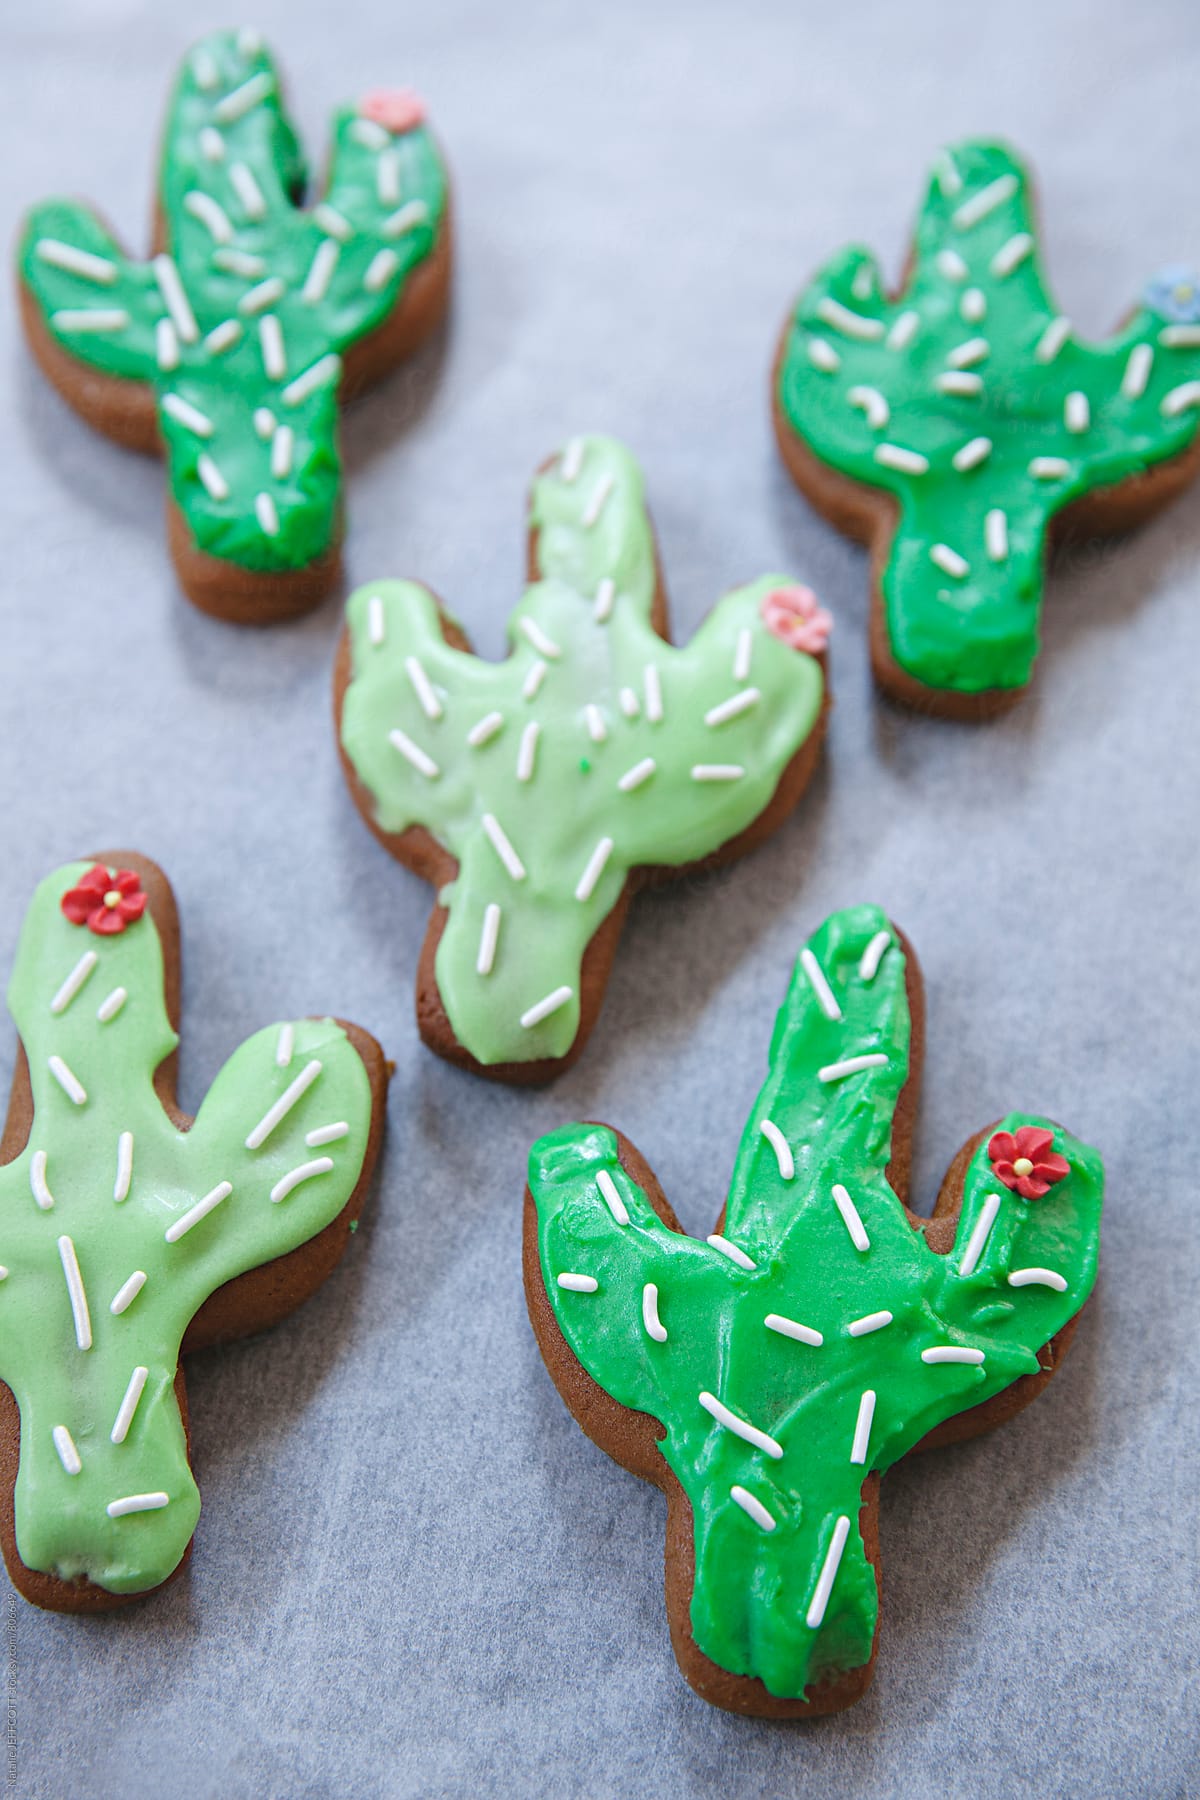 Home made gingerbread cookies in the shape of a cactus